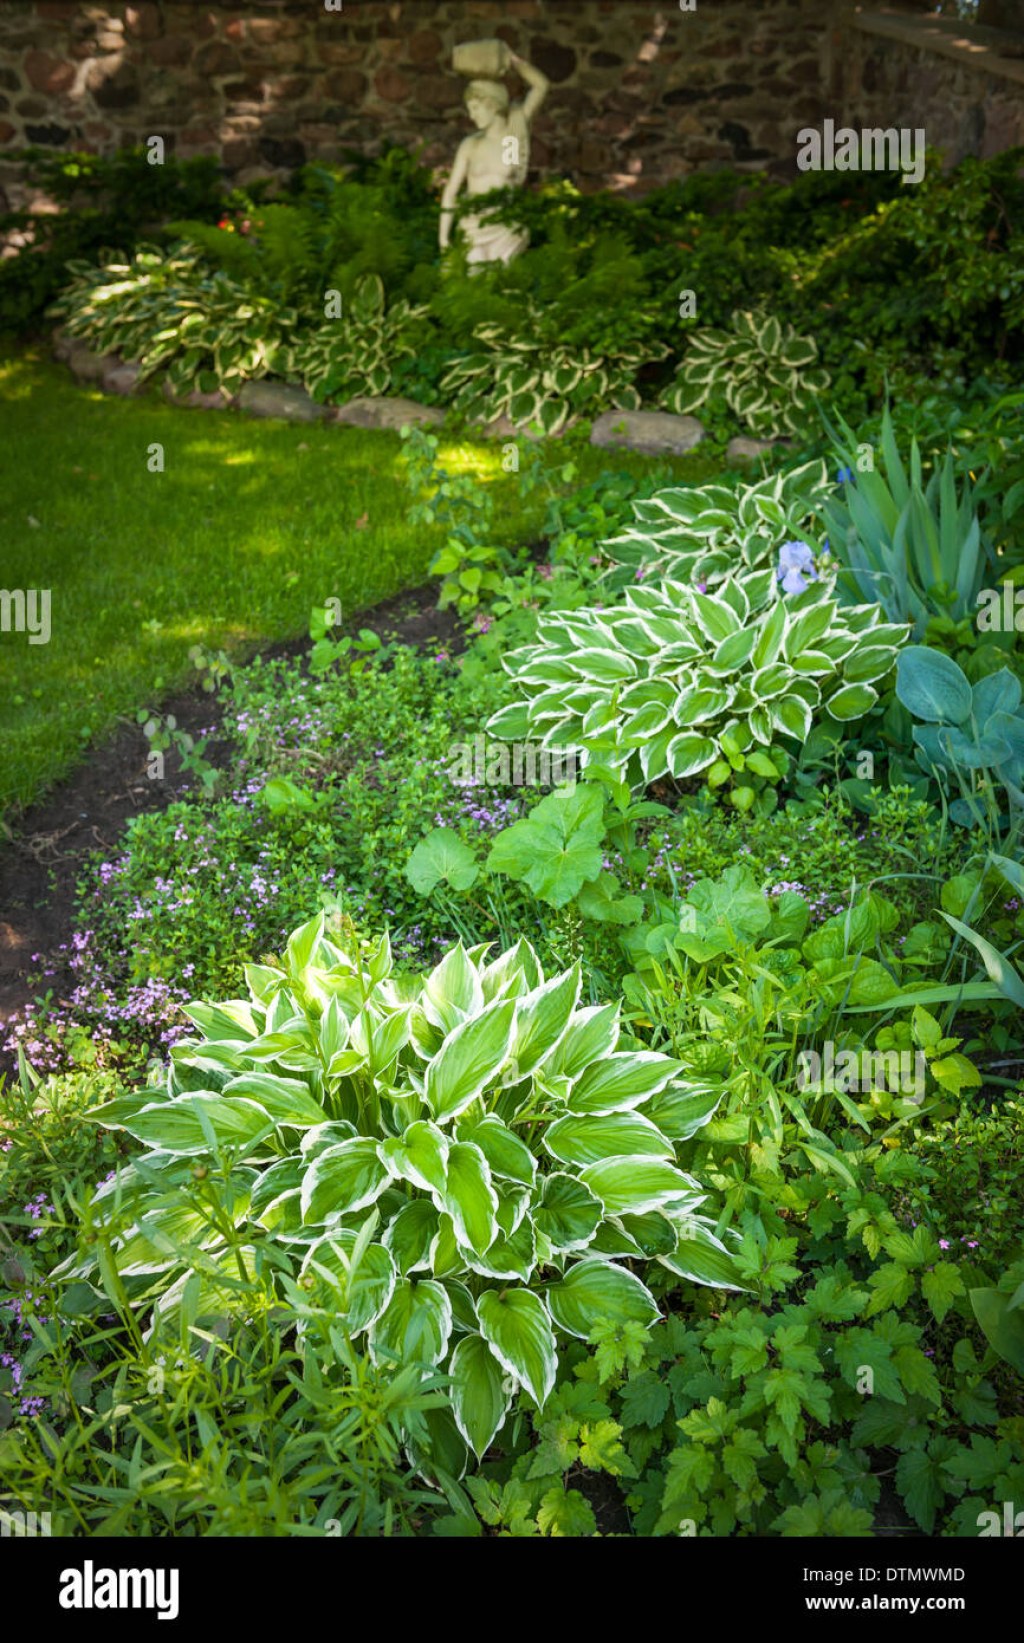 Picture of: Lush green summer garden with perennial plants and flowers Stock